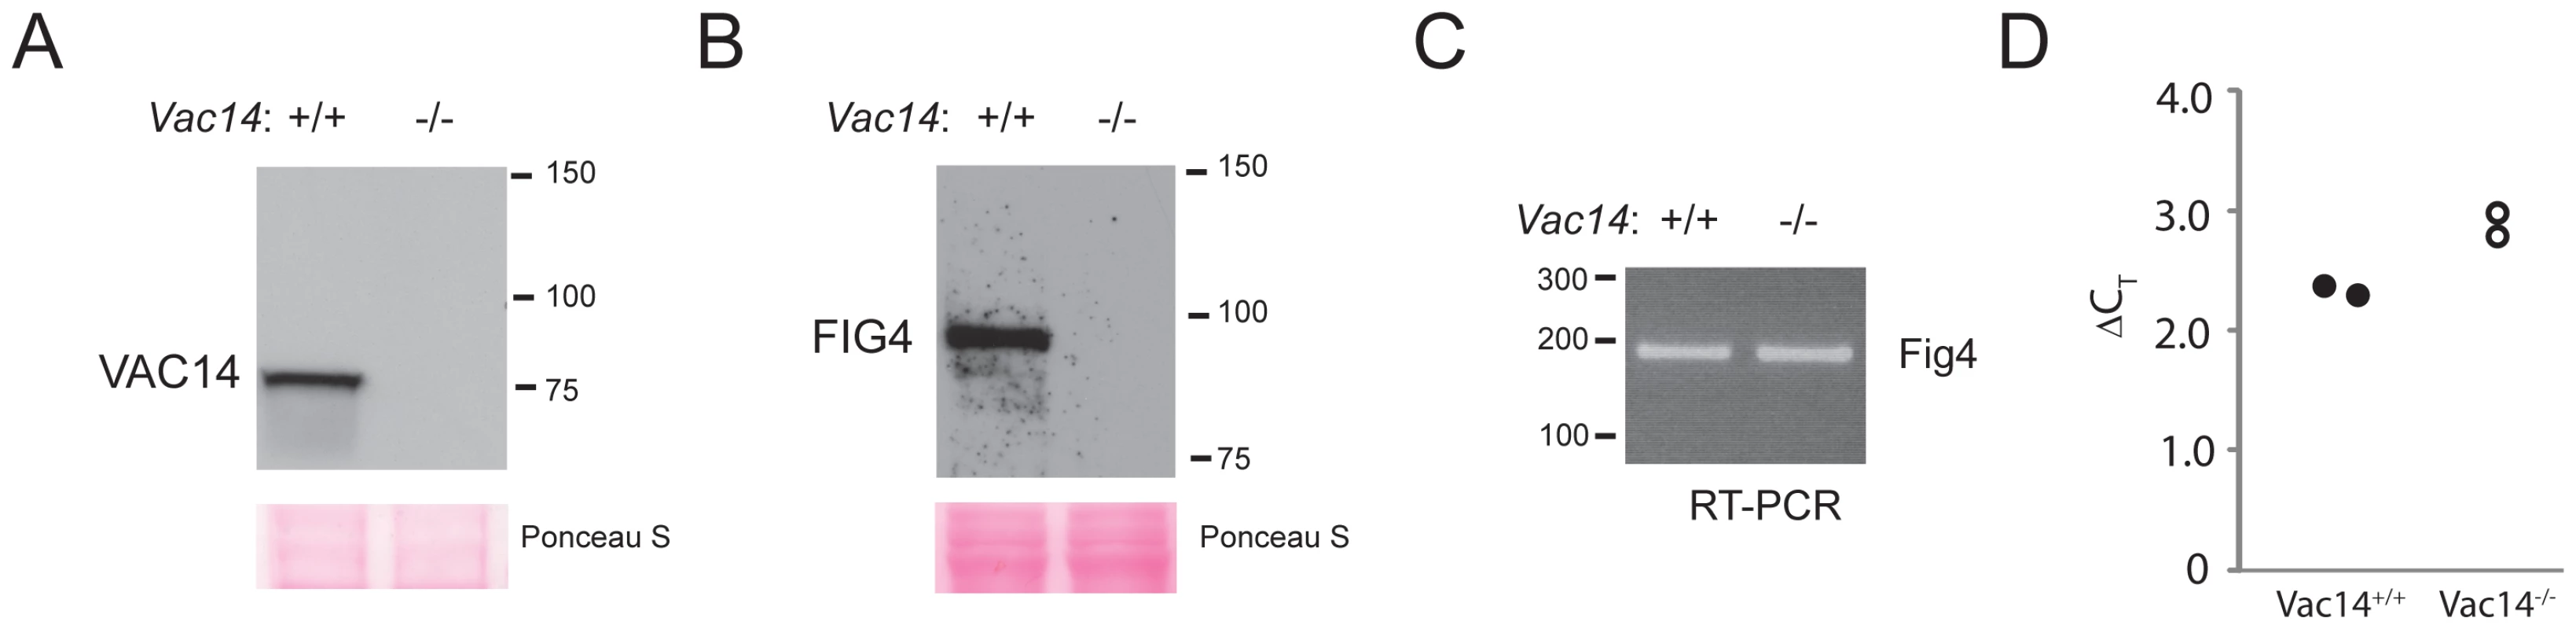 Low level of wildtype FIG4 protein in <i>Vac14</i> null mice.